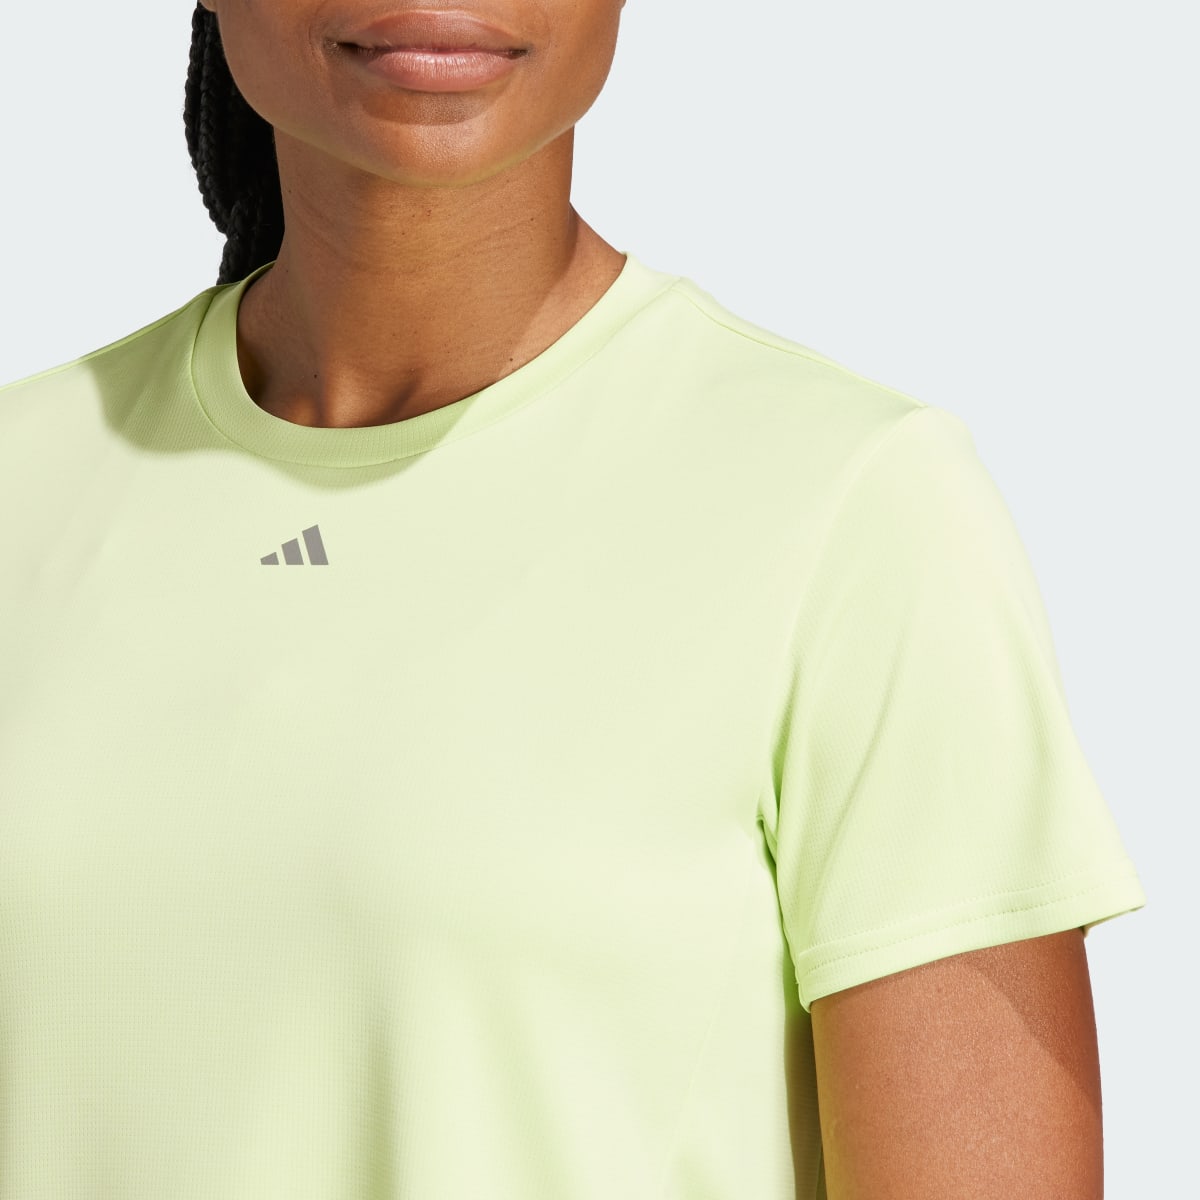 Adidas HIIT HEAT.RDY Sweat-Conceal Training T-Shirt. 6